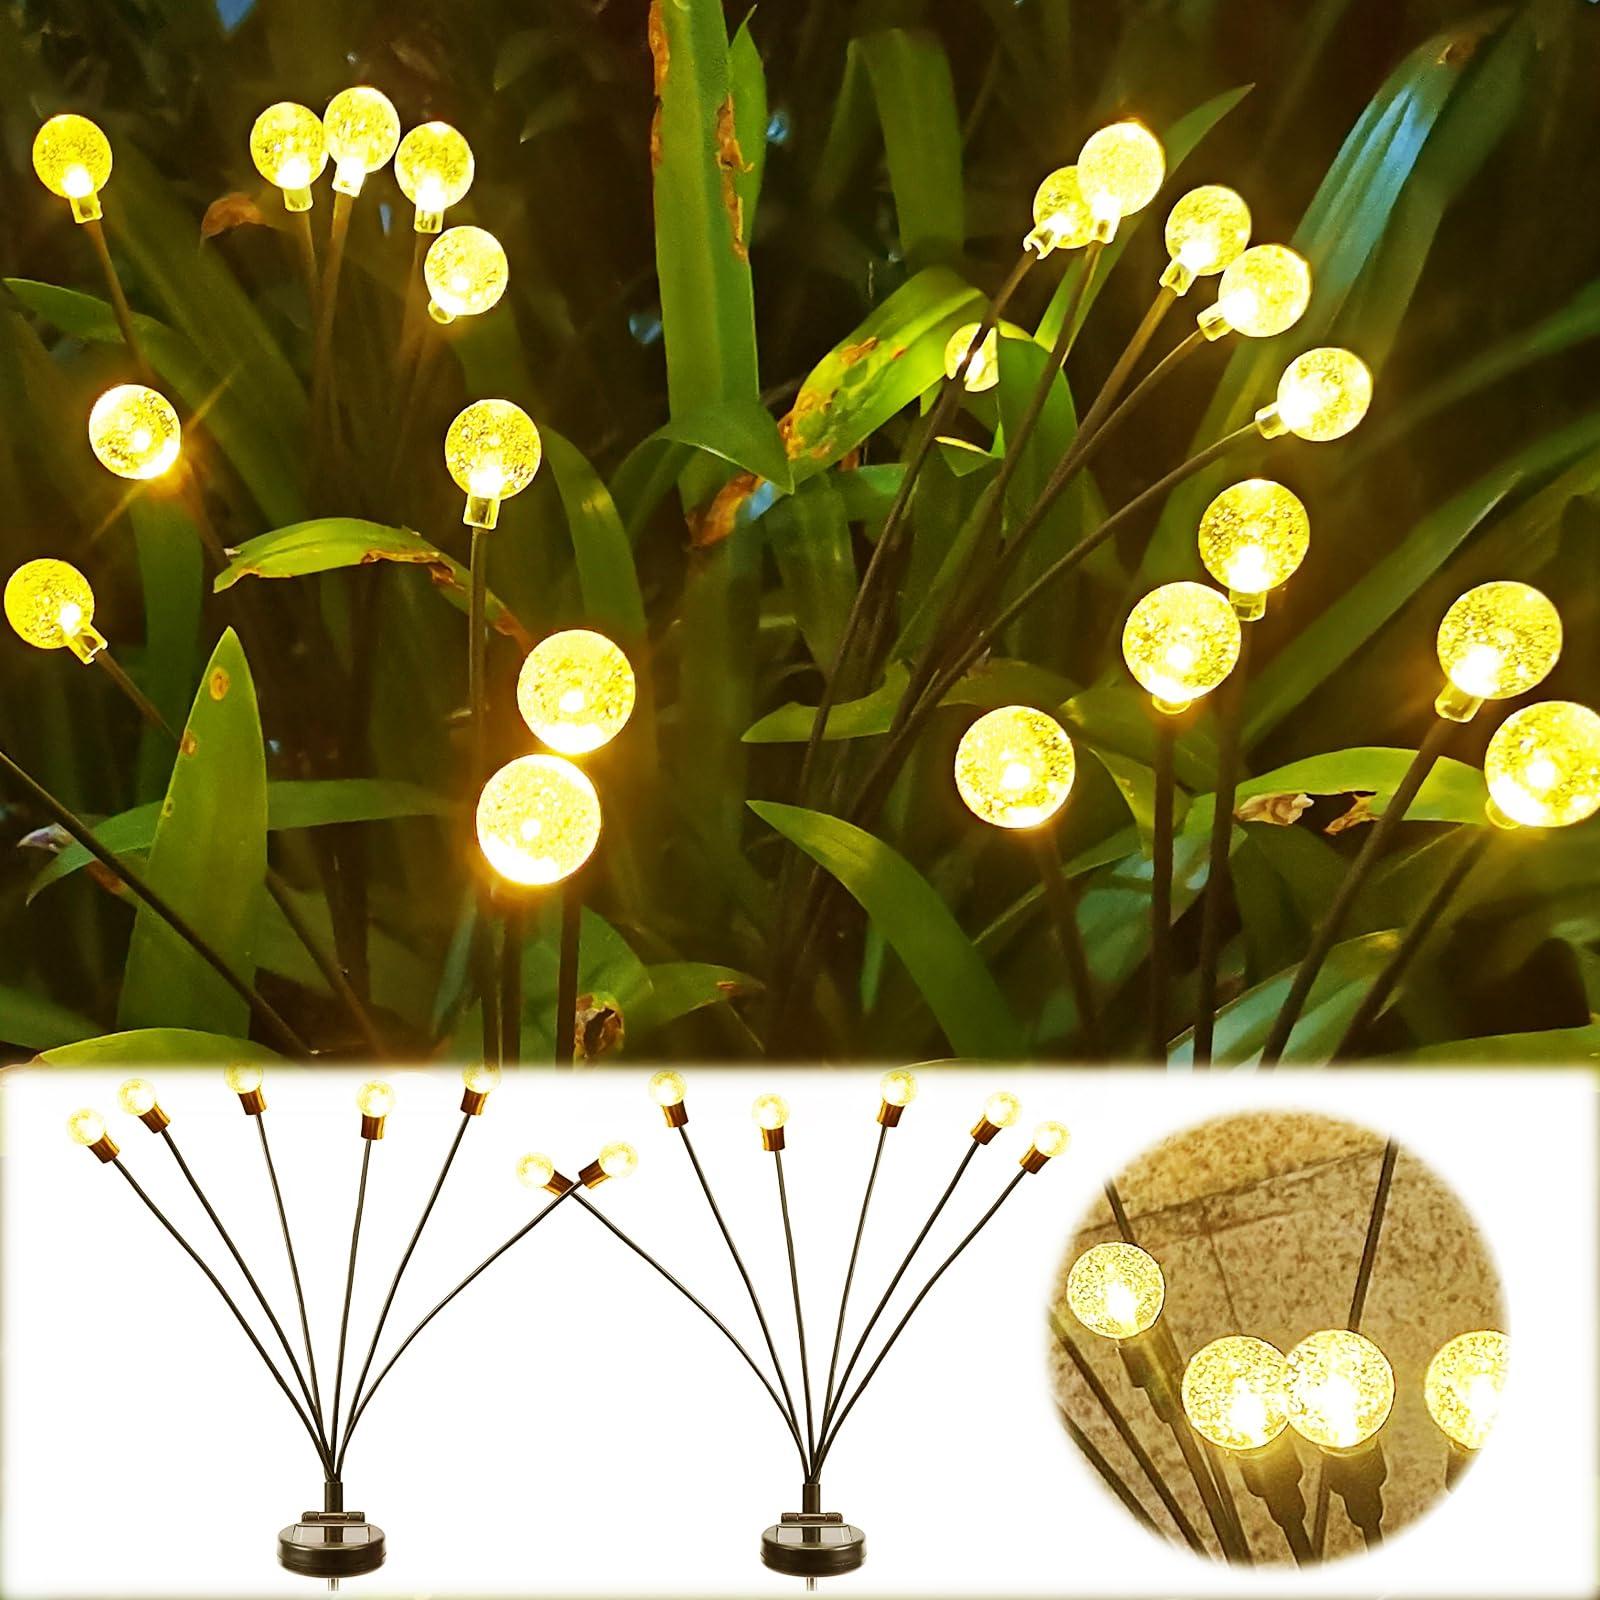 Neioaas 2PCS Solar Lights Sway by Wind, 6LED Solar Firefly Lights, Waterproof Swaying Solar Lights with 2 Modes, Pathway Lighting,Decoration for Garden Yard and Pathway - Warm Lights